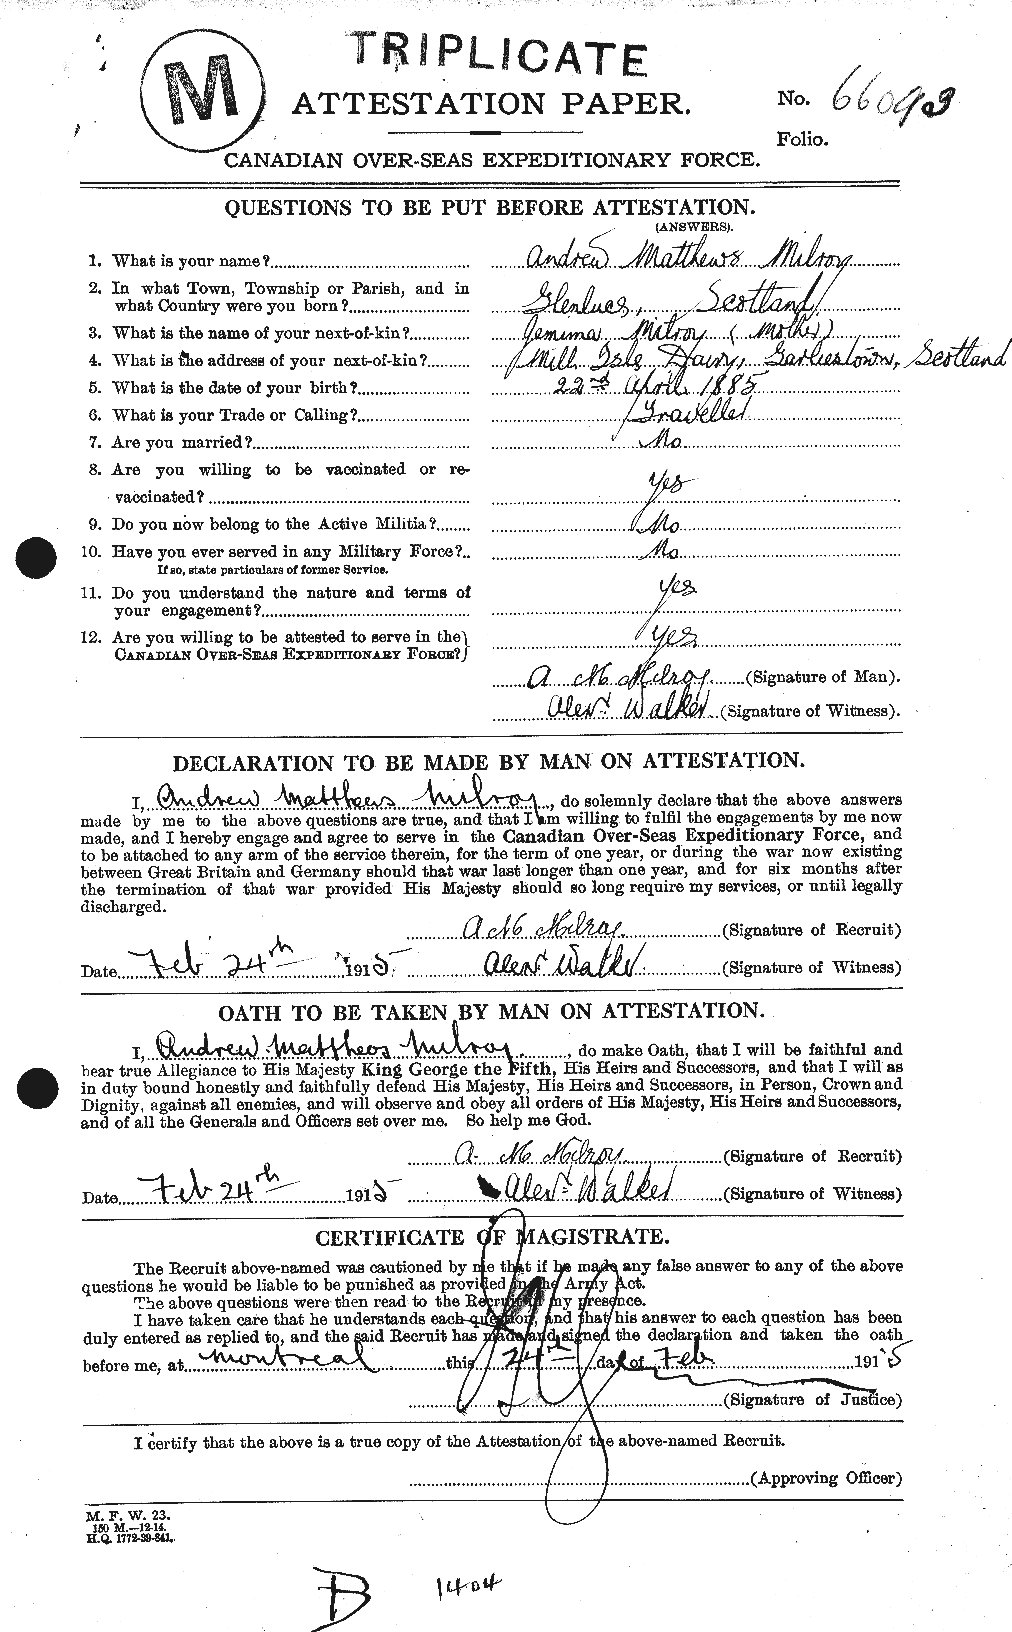 Personnel Records of the First World War - CEF 497485a